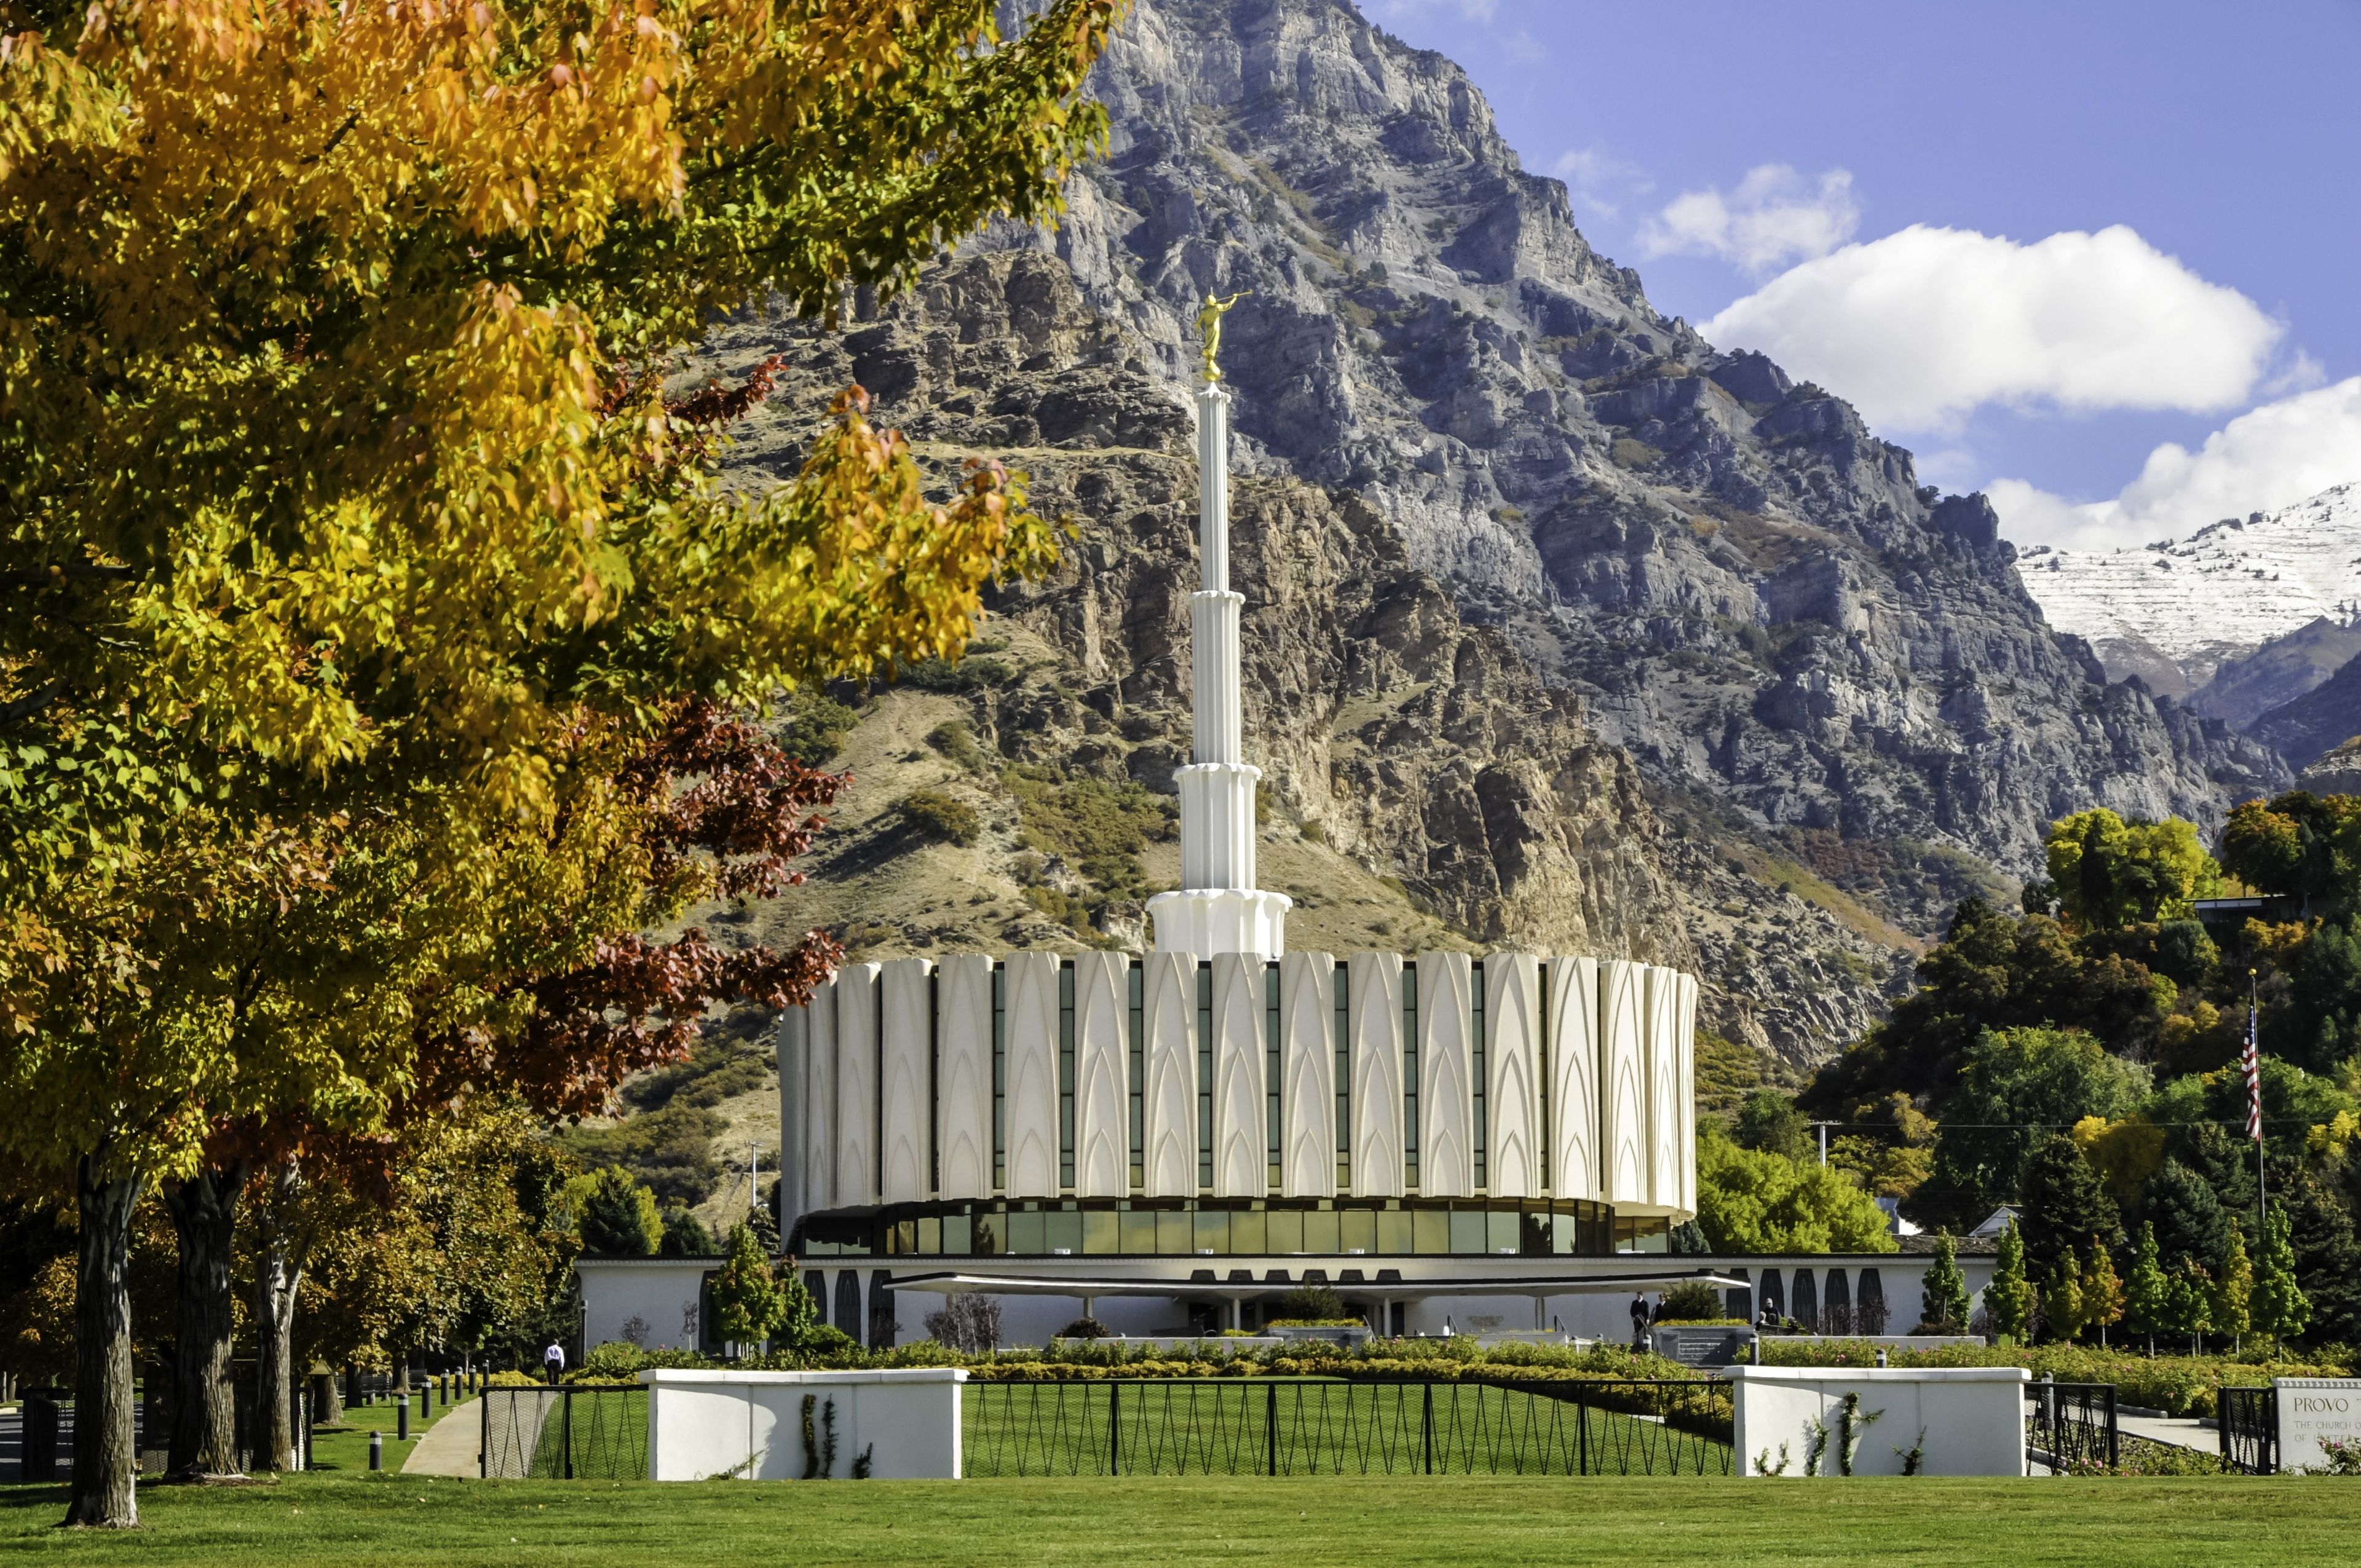 The Provo Utah Temple north side, including scenery.